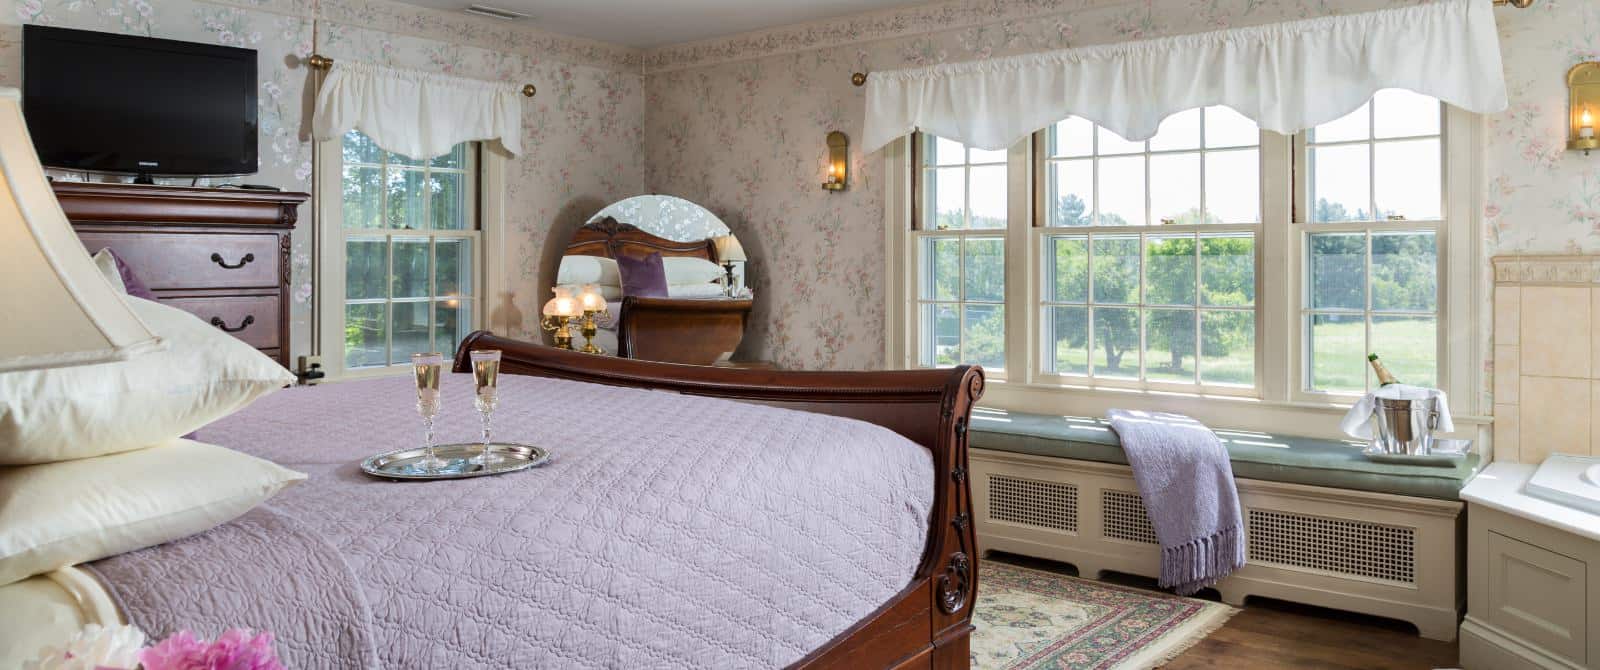 Bedroom with floral wallpaper, hardwood flooring, wooden sleigh bed, lavender bedding, wooden dresser, and jetted tub